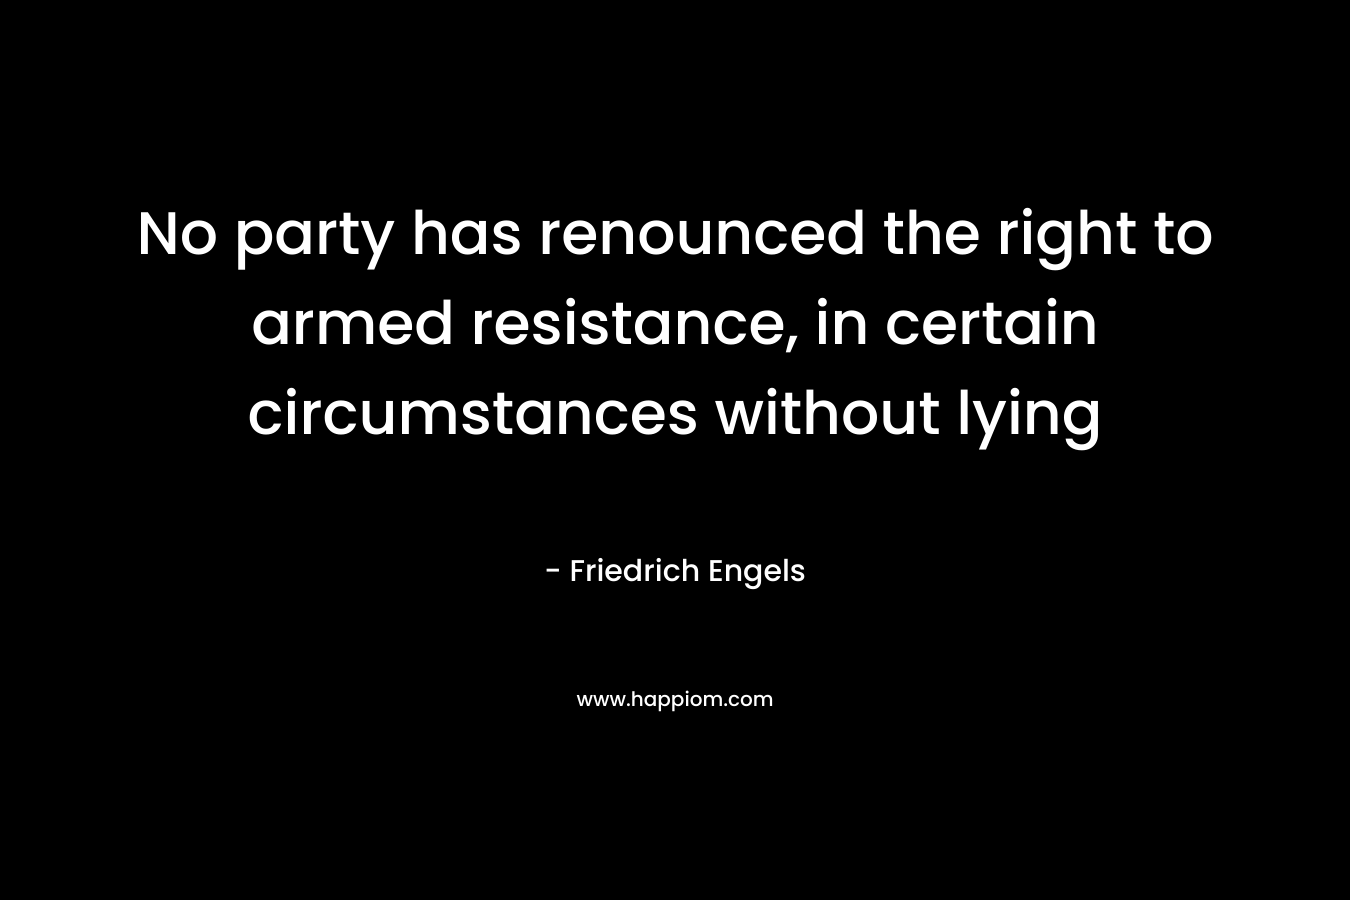 No party has renounced the right to armed resistance, in certain circumstances without lying